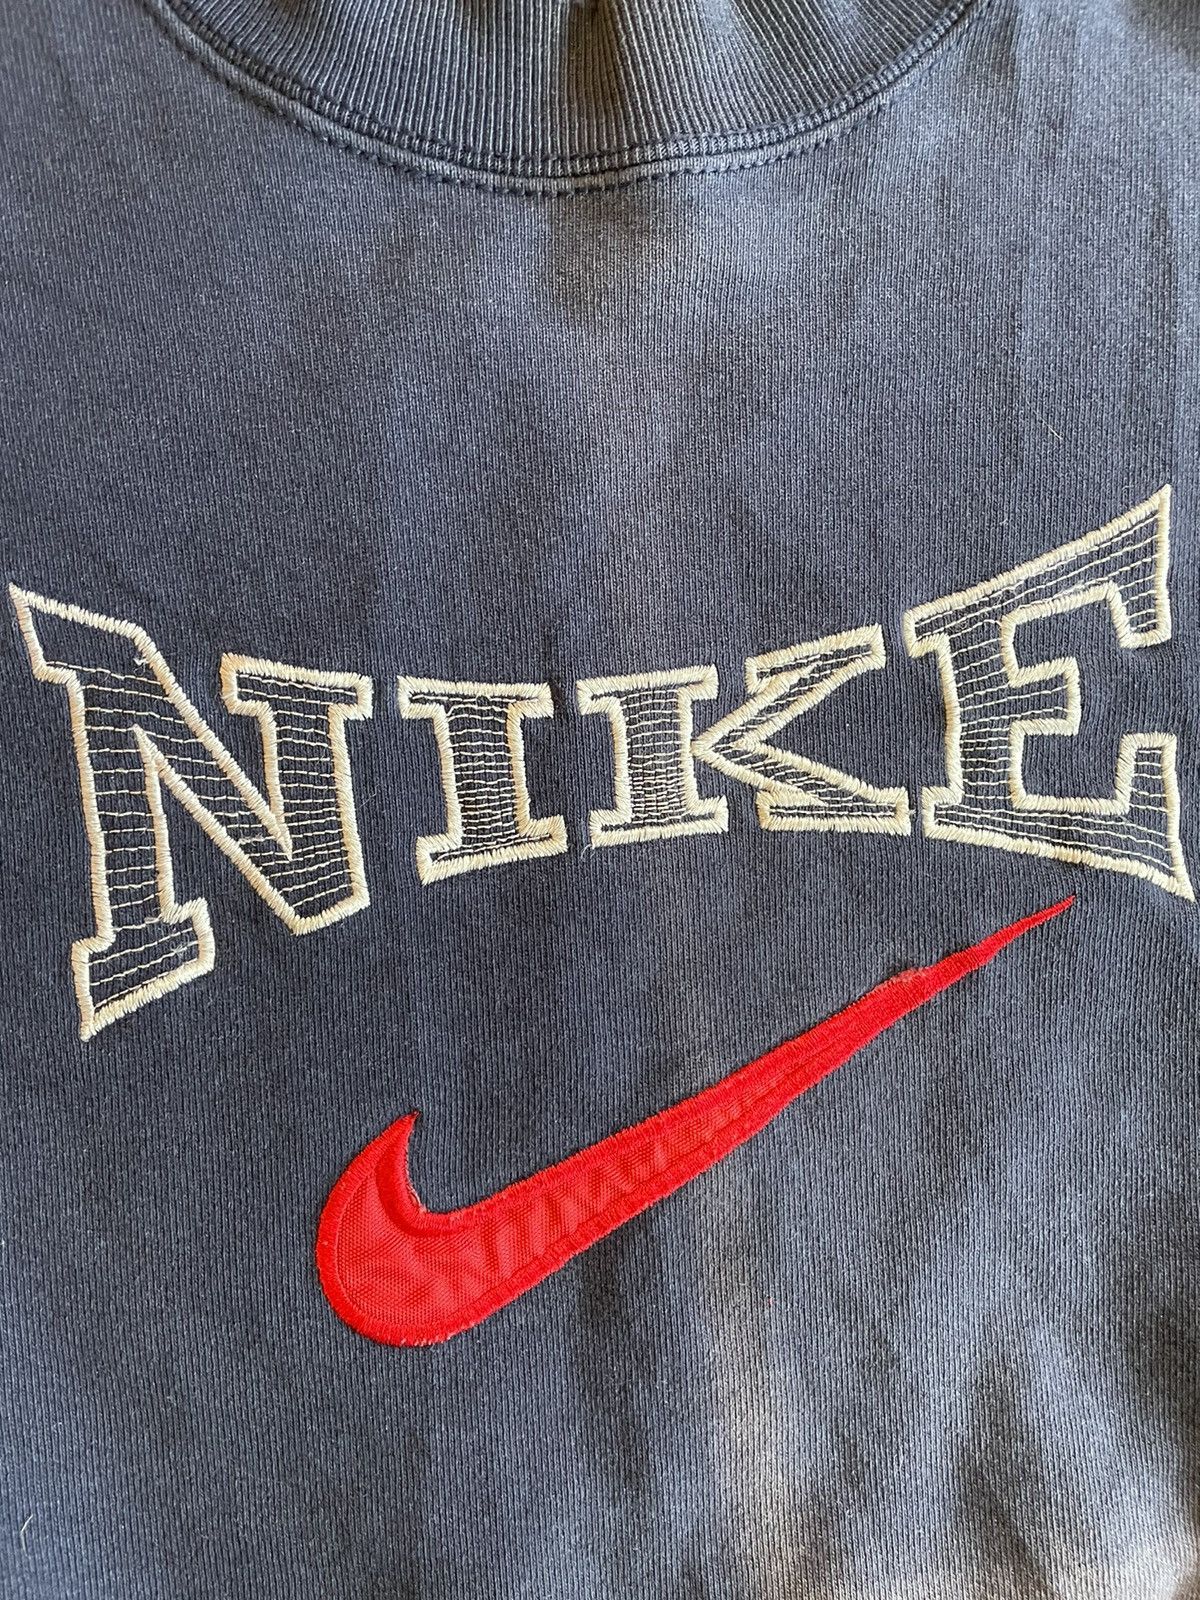 Nike Vintage 90s NIKE spell out USA made Size US XL / EU 56 / 4 - 2 Preview